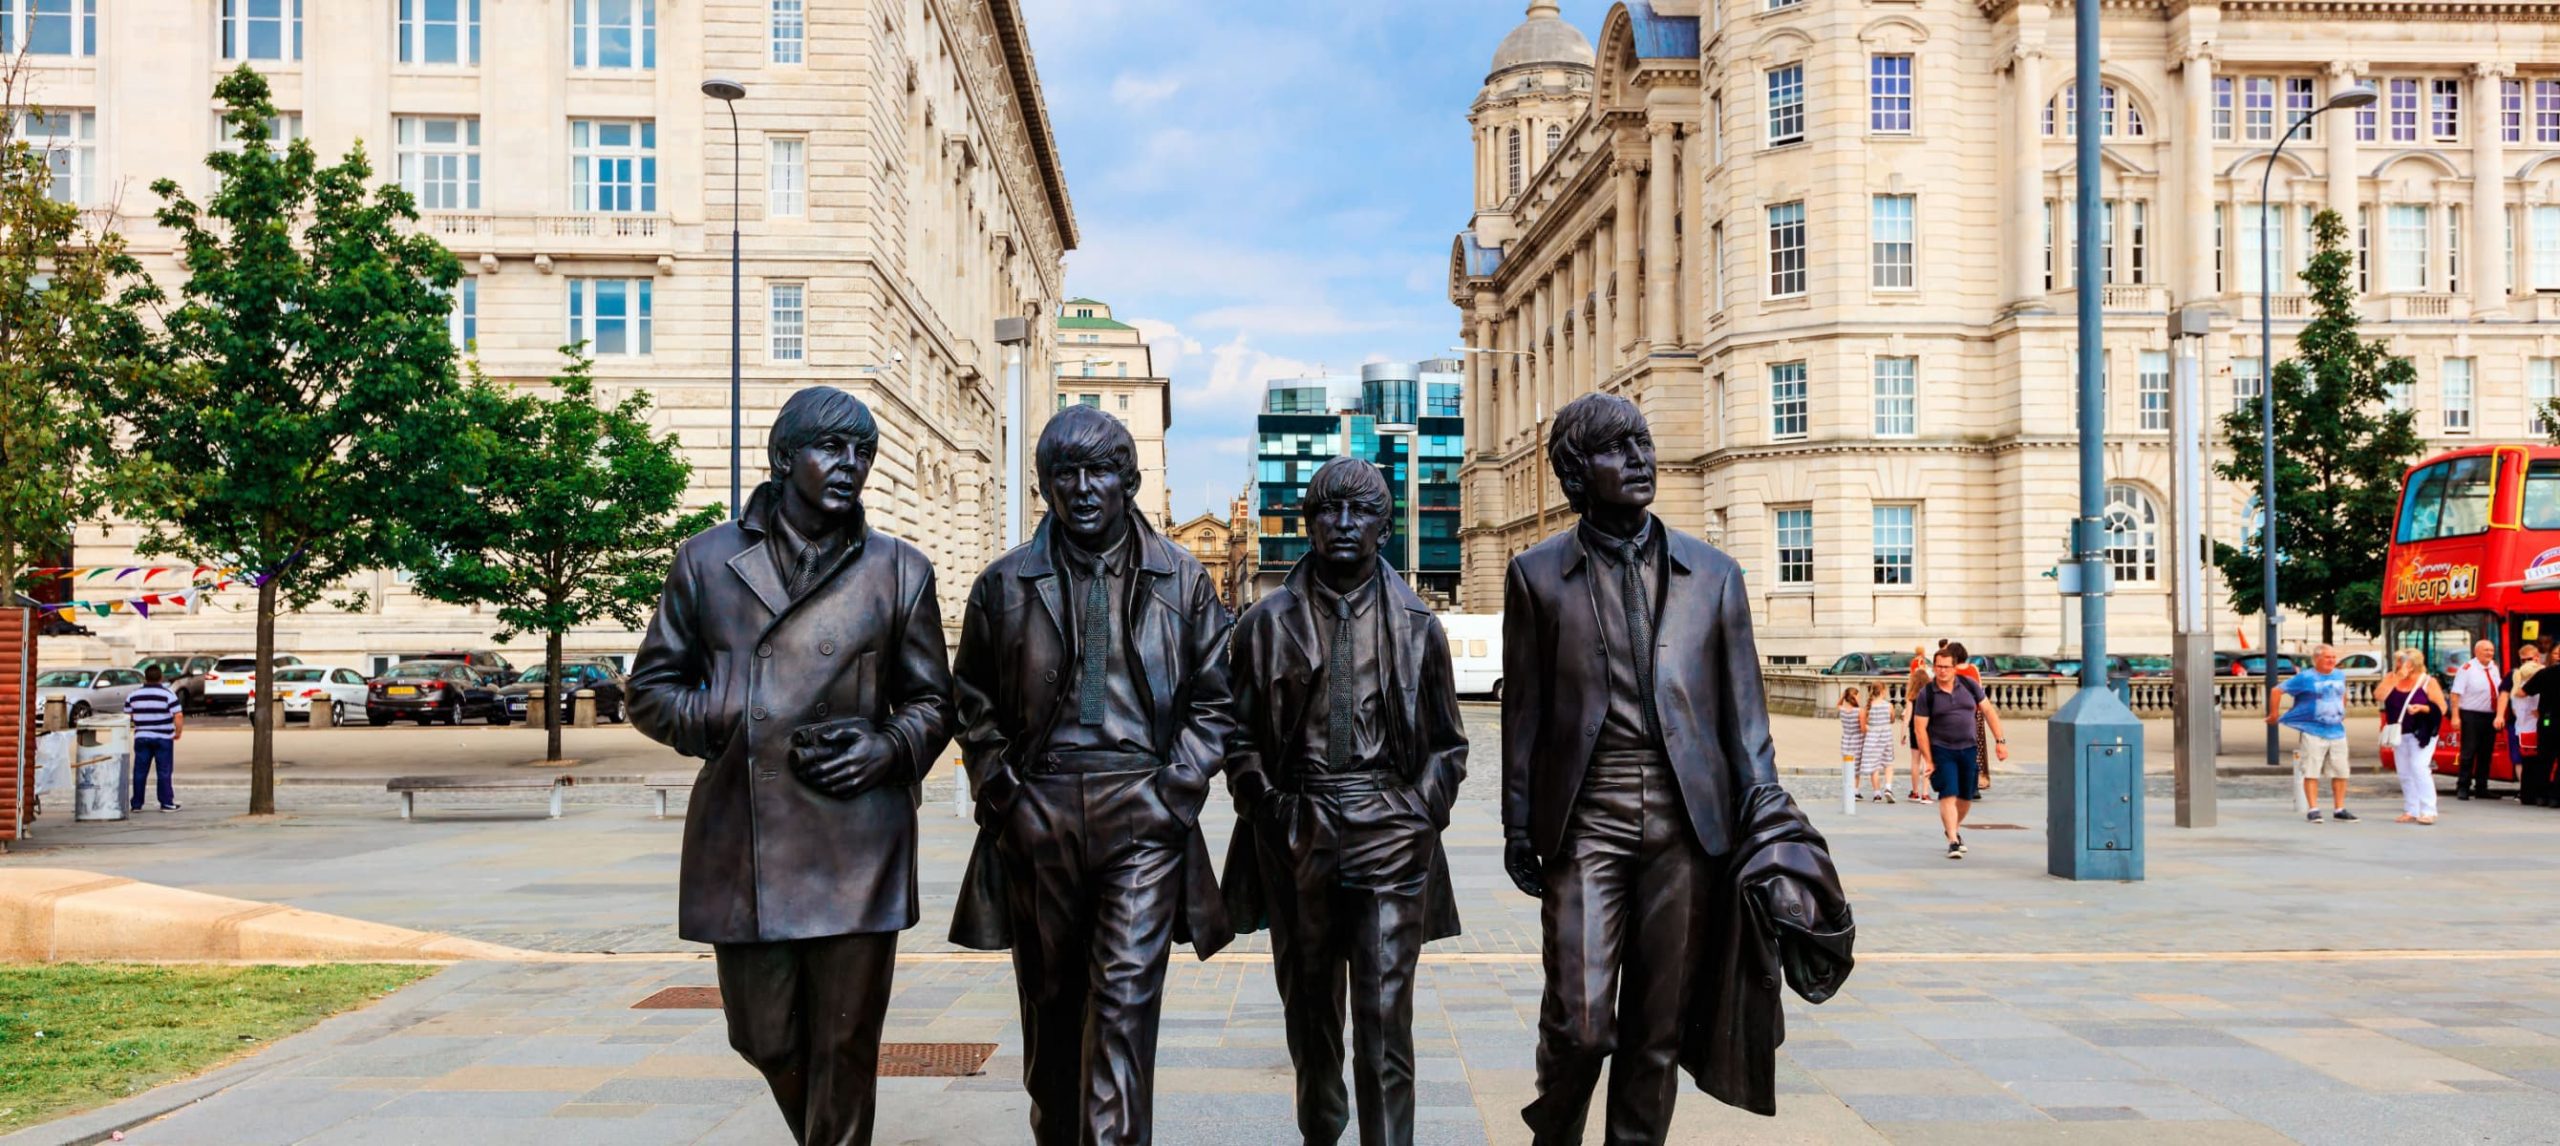 8 Best Things To Do In Liverpool